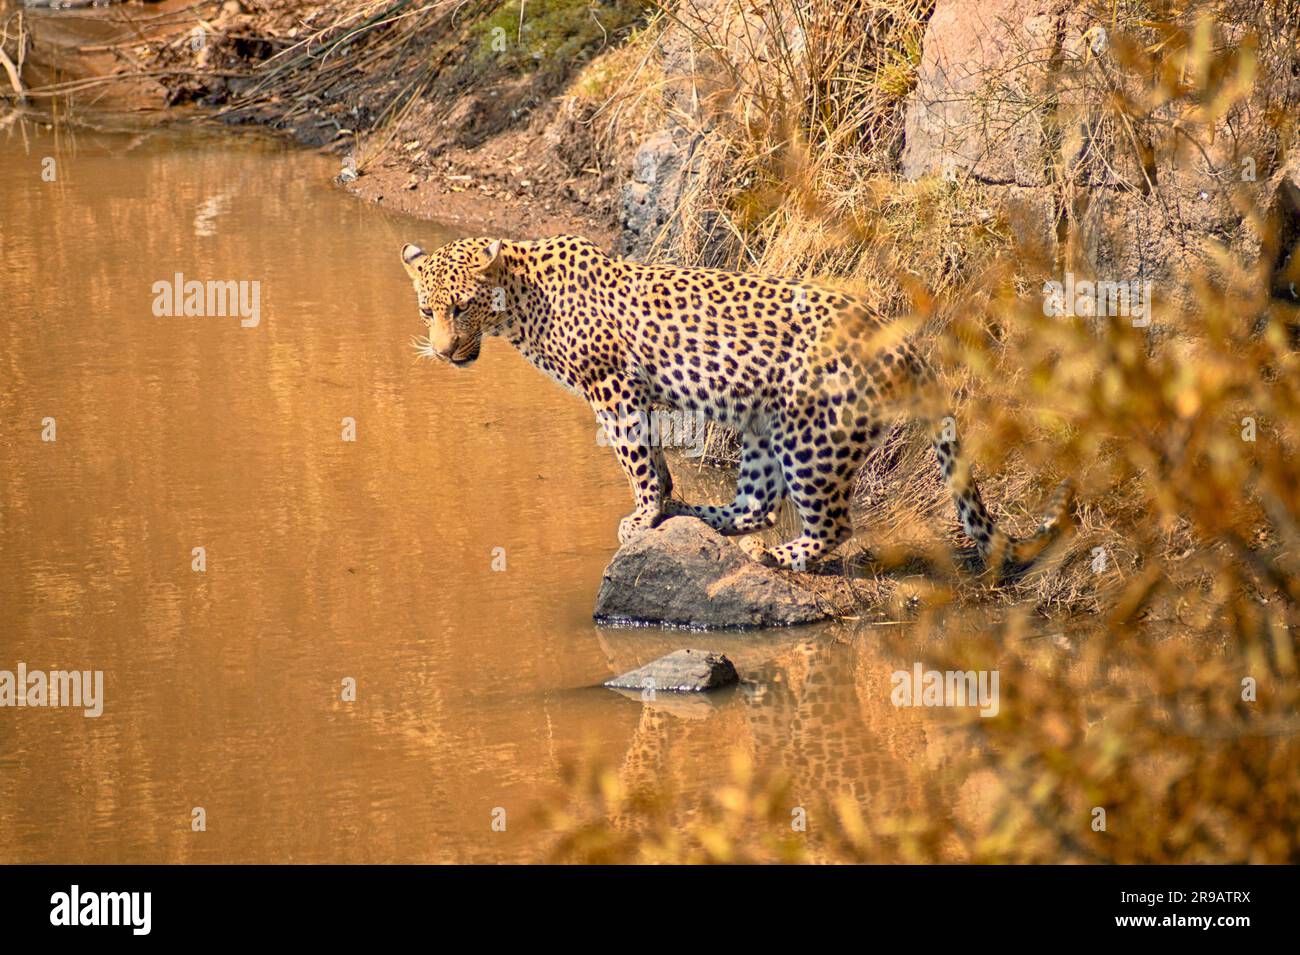 Leopard looking for fish in a waterhole in South Africa under a hot sun Stock Photo